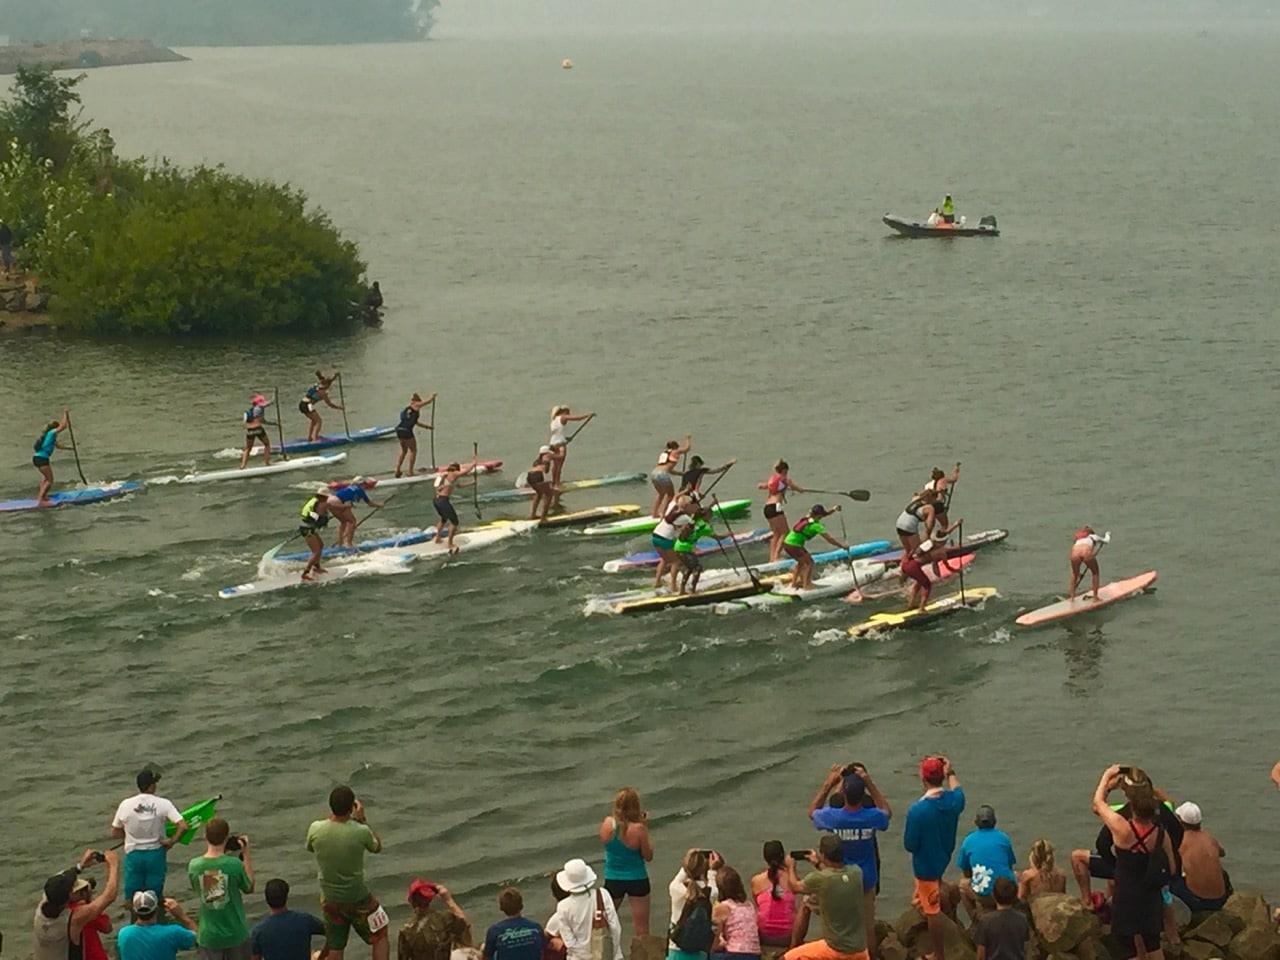 Elite Competition at the 2015 Gorge Paddle Challenge - Naish.com